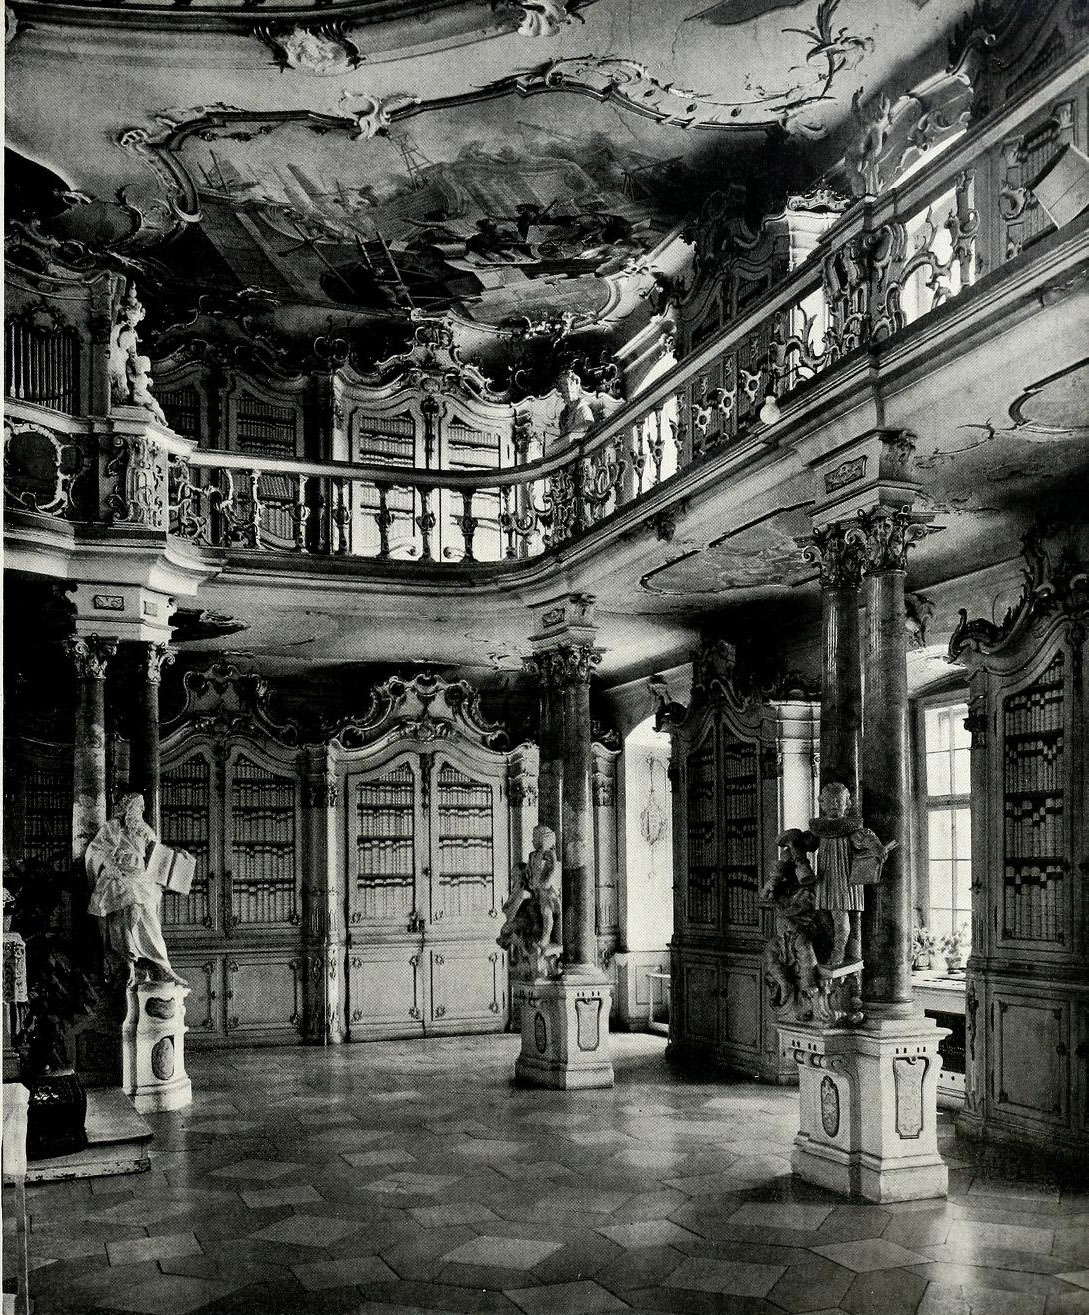 Inside the library at Schussenried Abbey, Württemberg